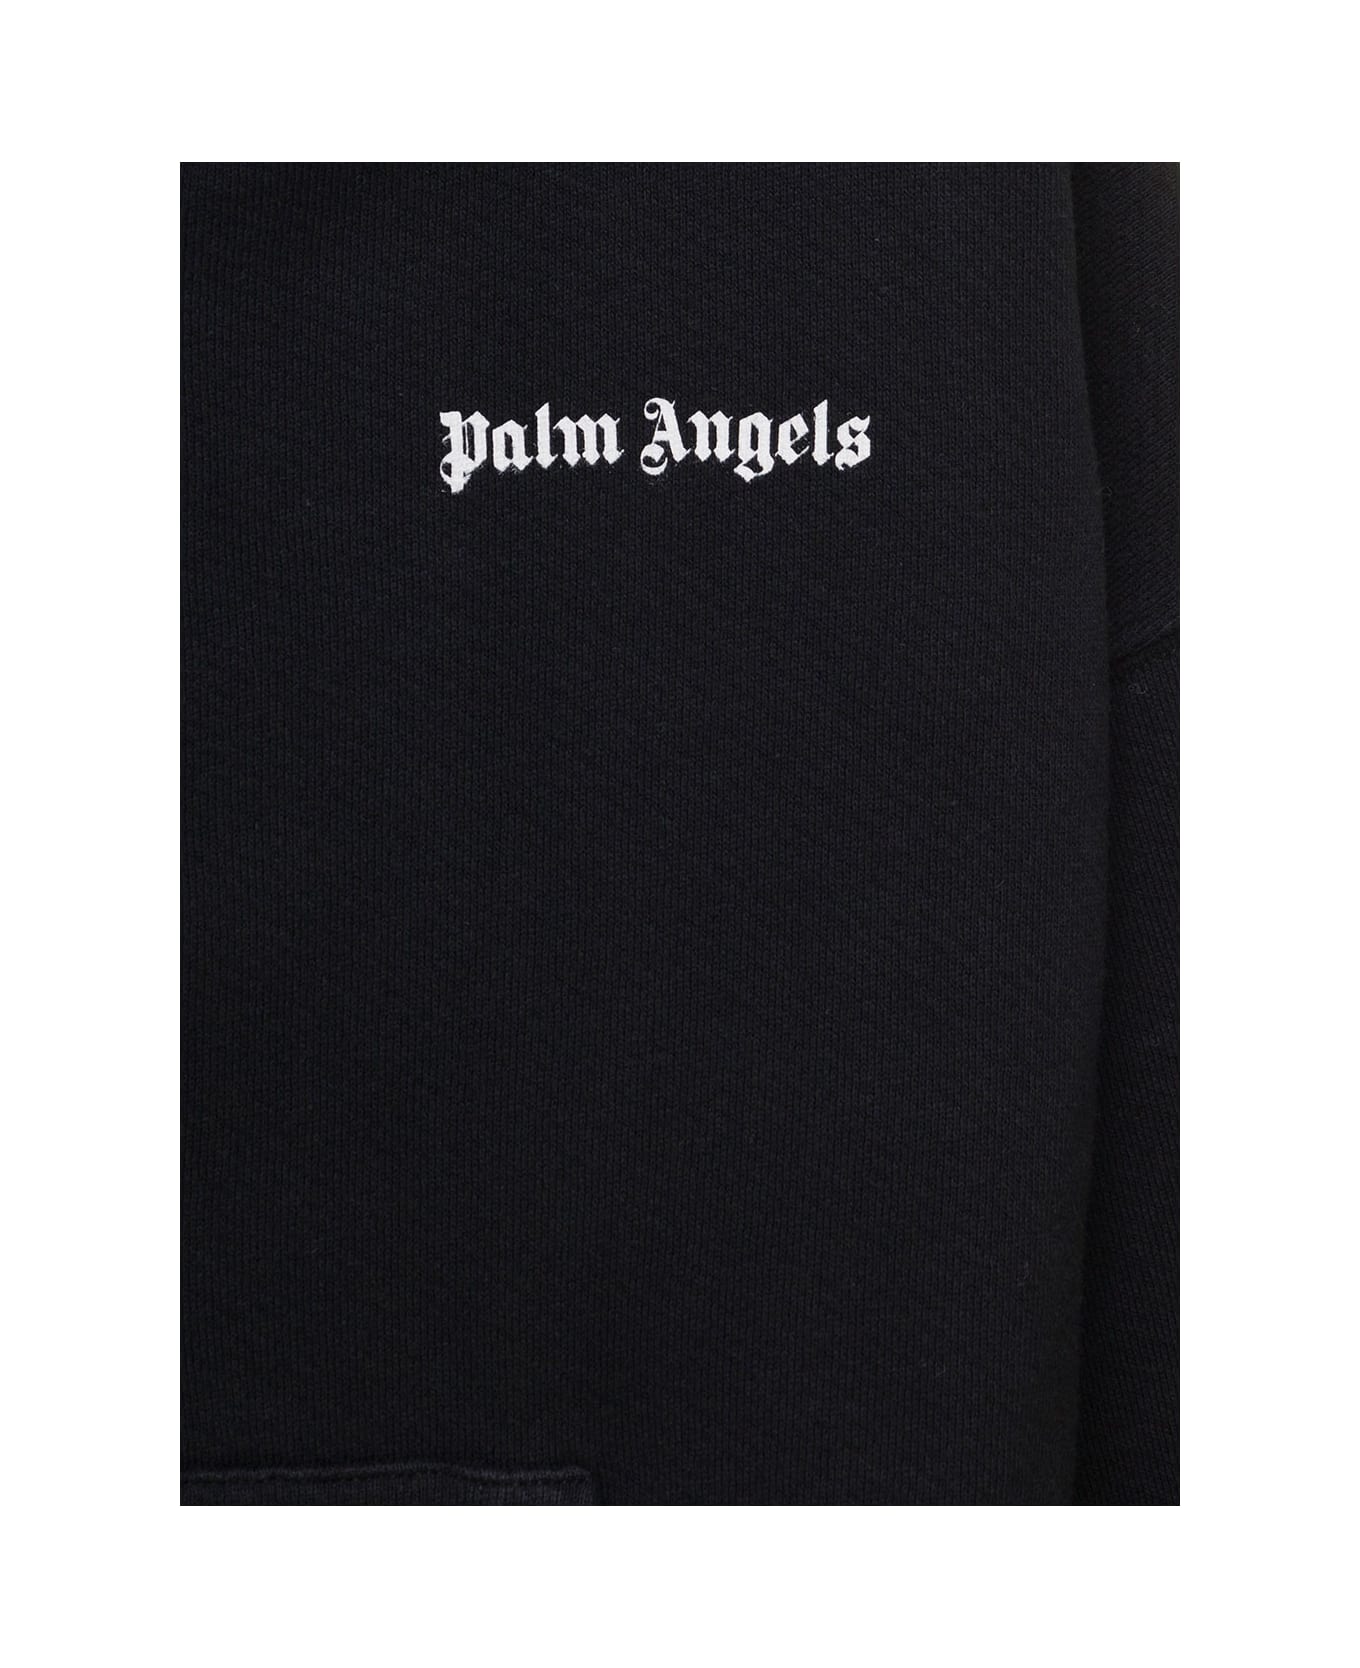 Palm Angels Palm Angel Kids Boy's Black Hoodie With Zip And Classic Overlogo - Black